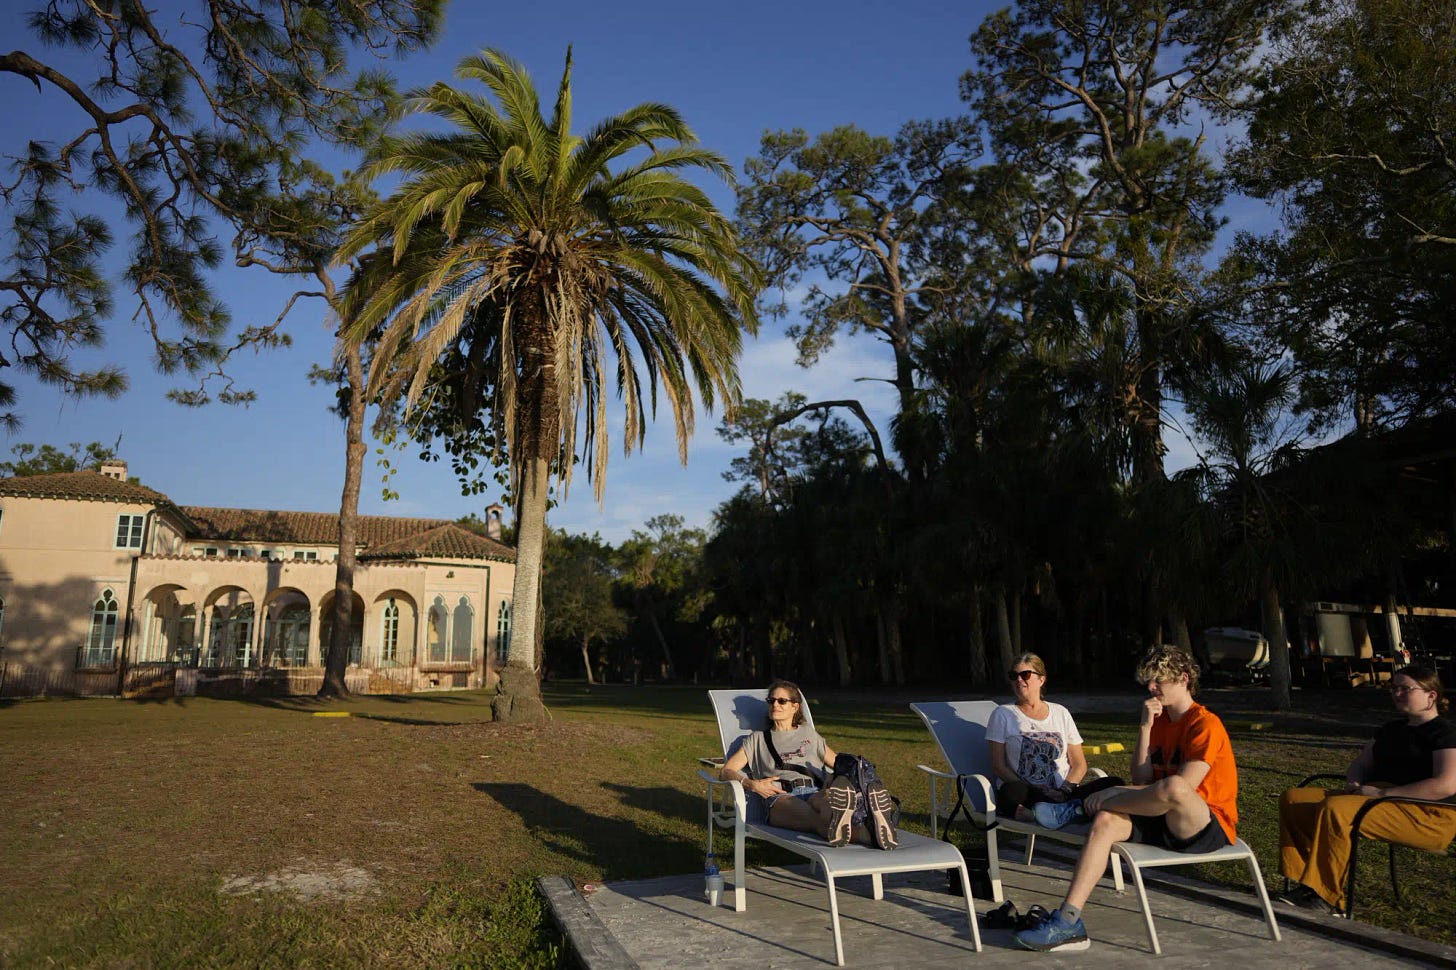 Joyce White, third from right, sits with her daughter Lola, right, son Liam, second right, and friend Eliana Salzhauer, on the waterfront at New College of Florida, where Lola is a third-year biology major with plans to be a veterinarian, Wednesday, March 1, 2023, in Sarasota, Fla. "We found this little school that was perfect for Lola," said White, whose daughter is autistic, has ADHD, and excelled at school, but found it very stressful. "Now it feels like everything has blown up." (AP Photo/Rebecca Blackwell)